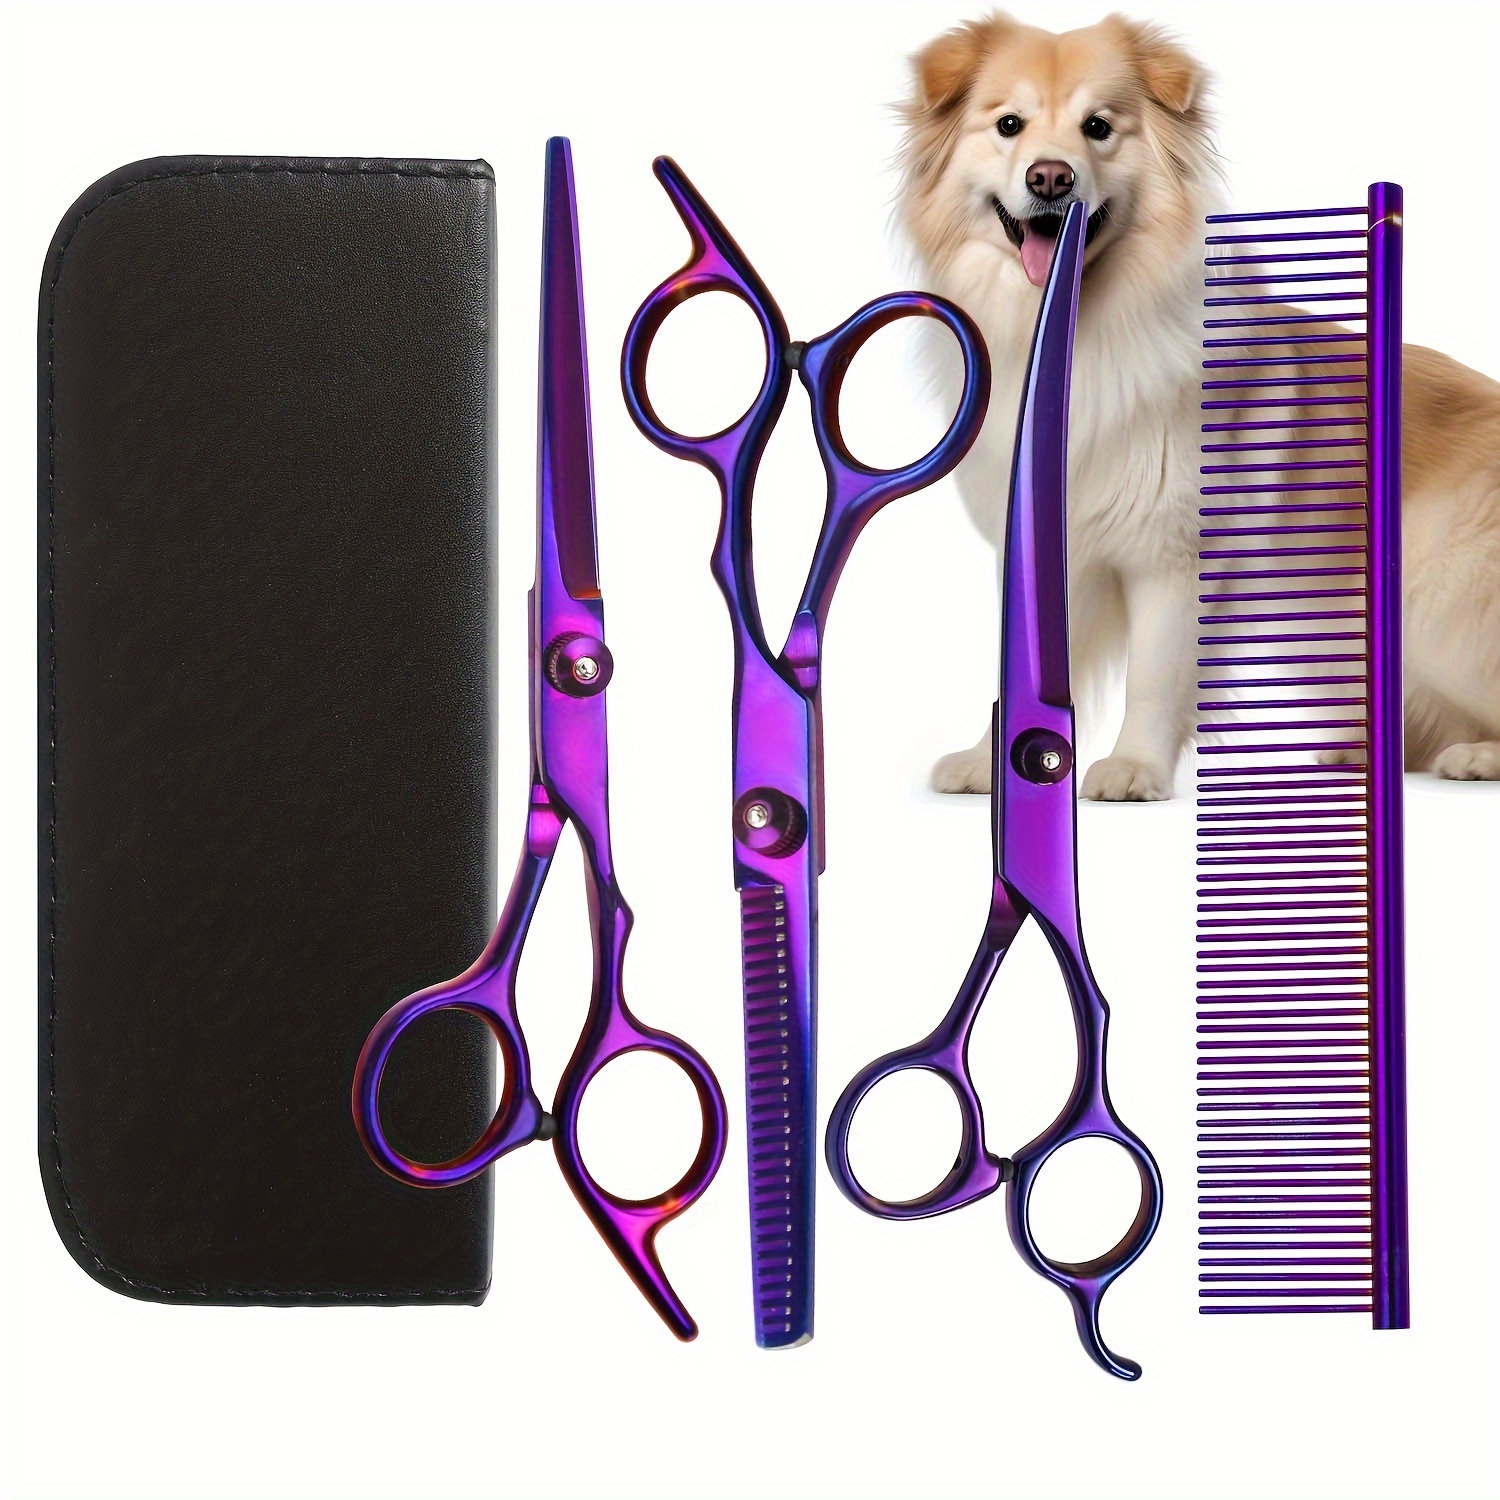 

4pcs Pet Grooming Scissors Kit, Premium Stainless Steel Straight & Curved & Thinning Blade Dog Hair Cutting Shears Set With Storage Case